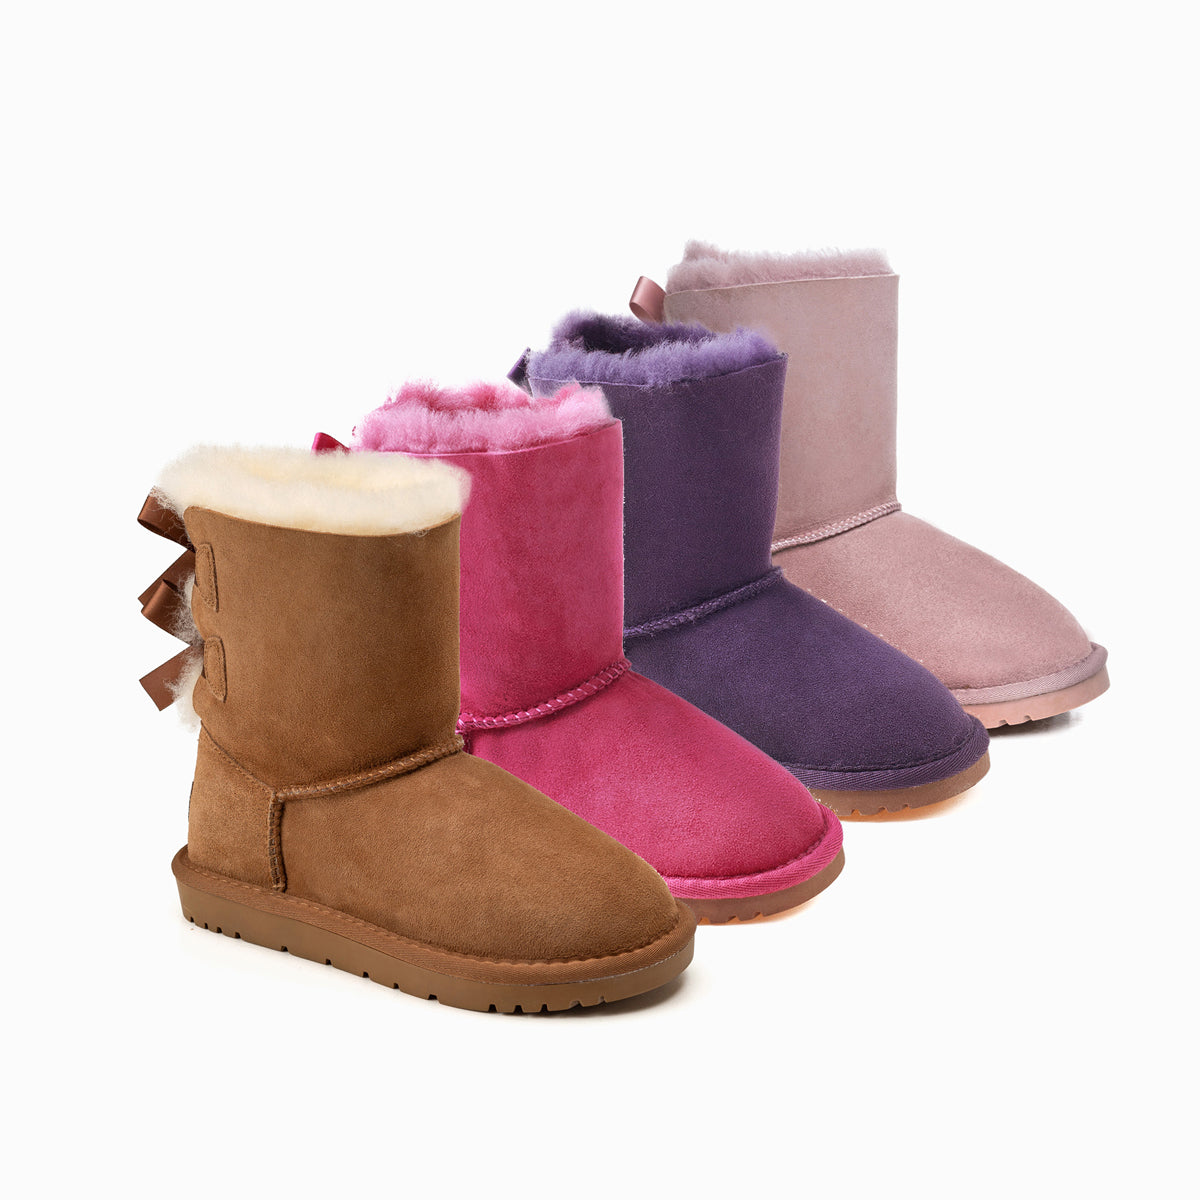 Uggs Are On Starting At $45! | lupon.gov.ph